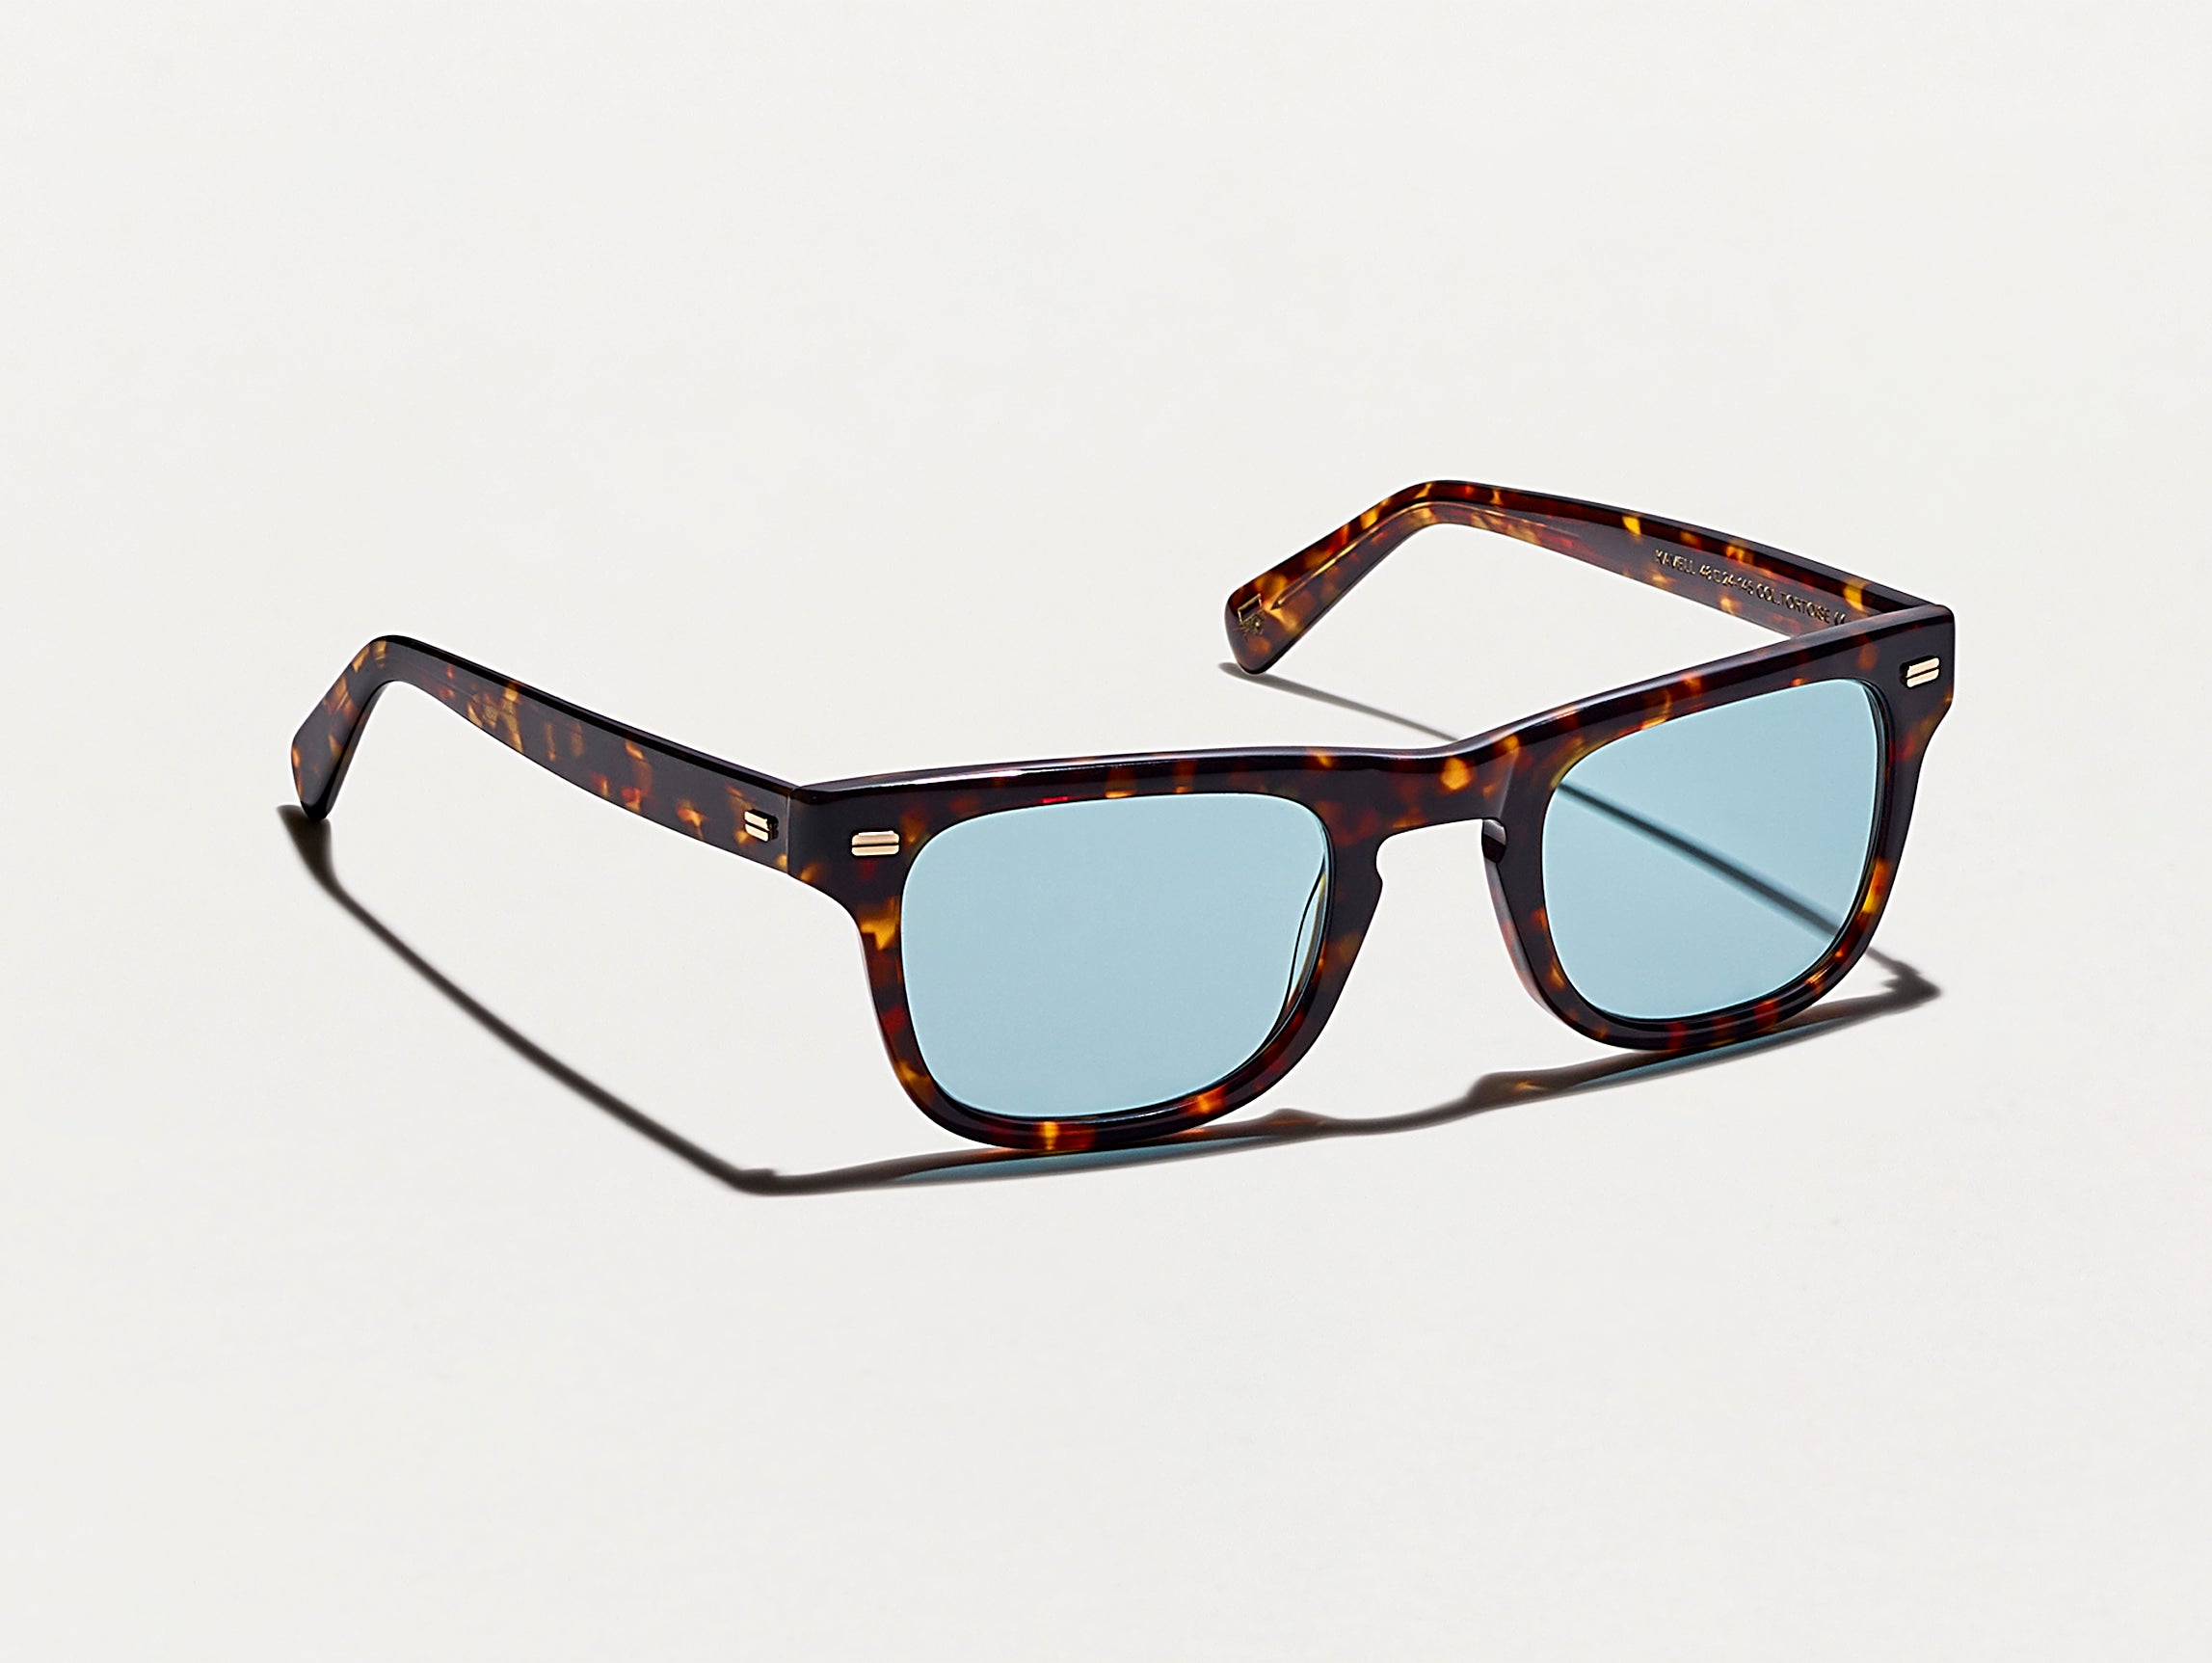 The KAVELL SUN in Tortoise with Blue Glass Lenses